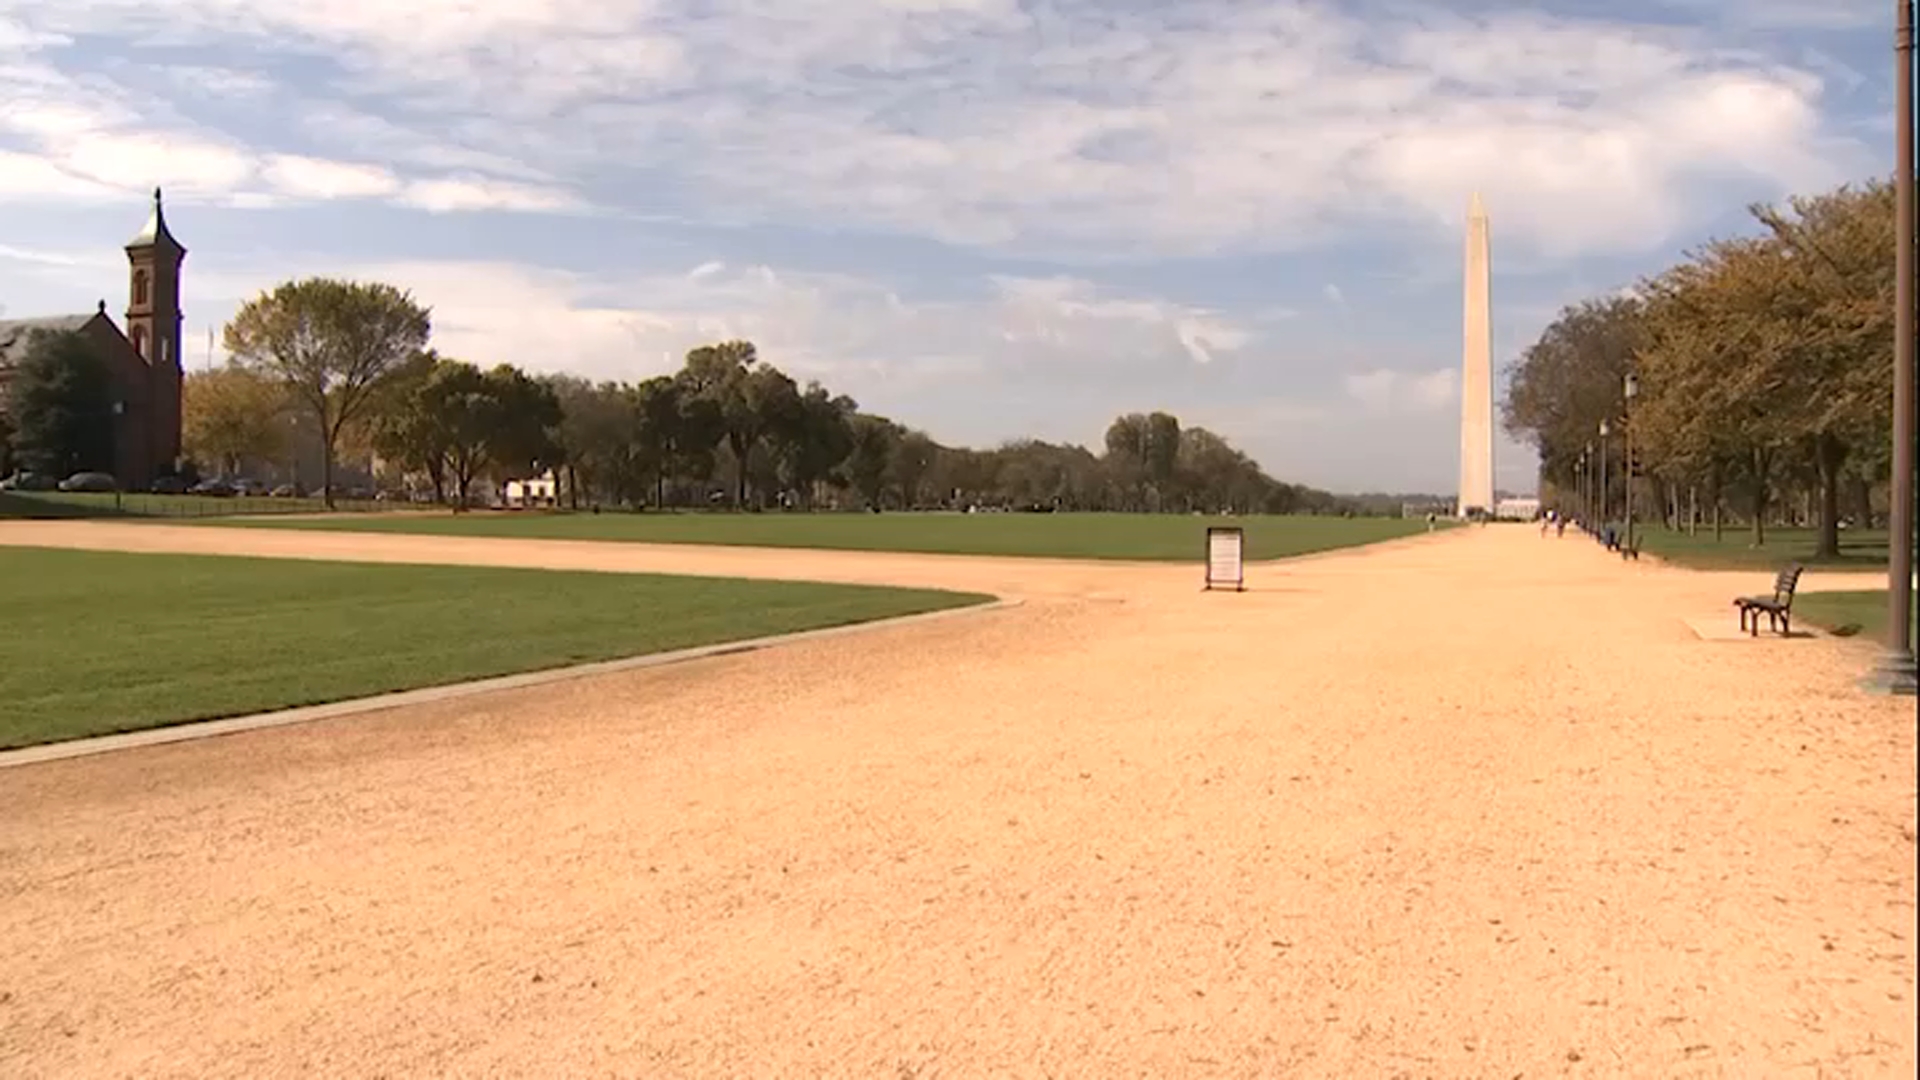 Worship Protest Planned on National Mall Without Mask Requirement Prompts Super Spread Concerns